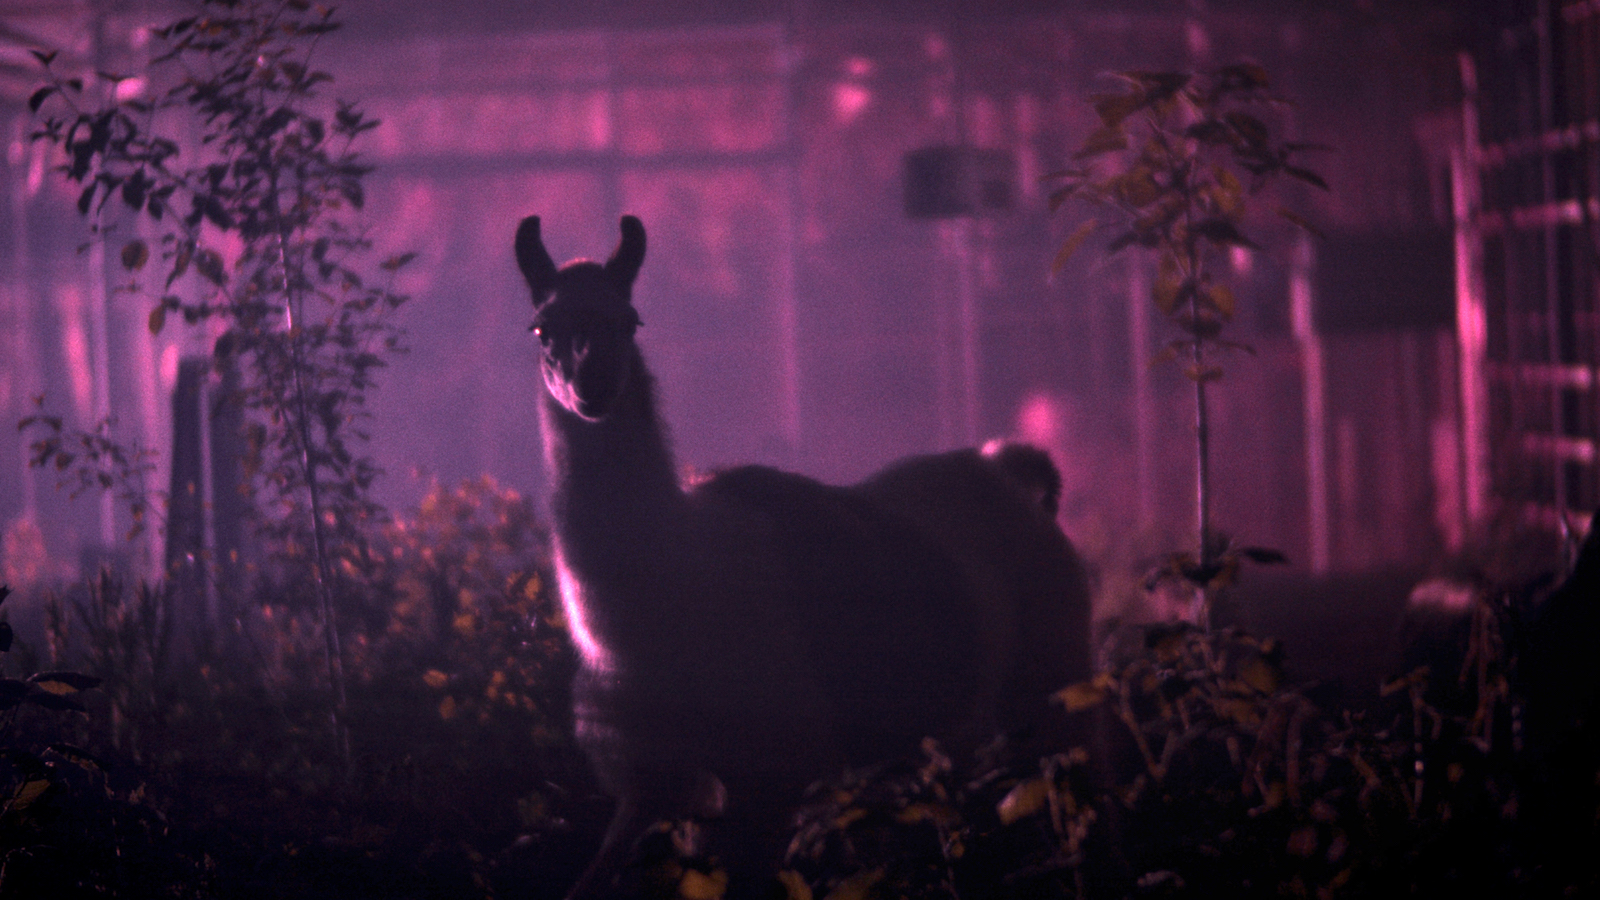 A llama looks at the camera surrounded by purple cloudy haze